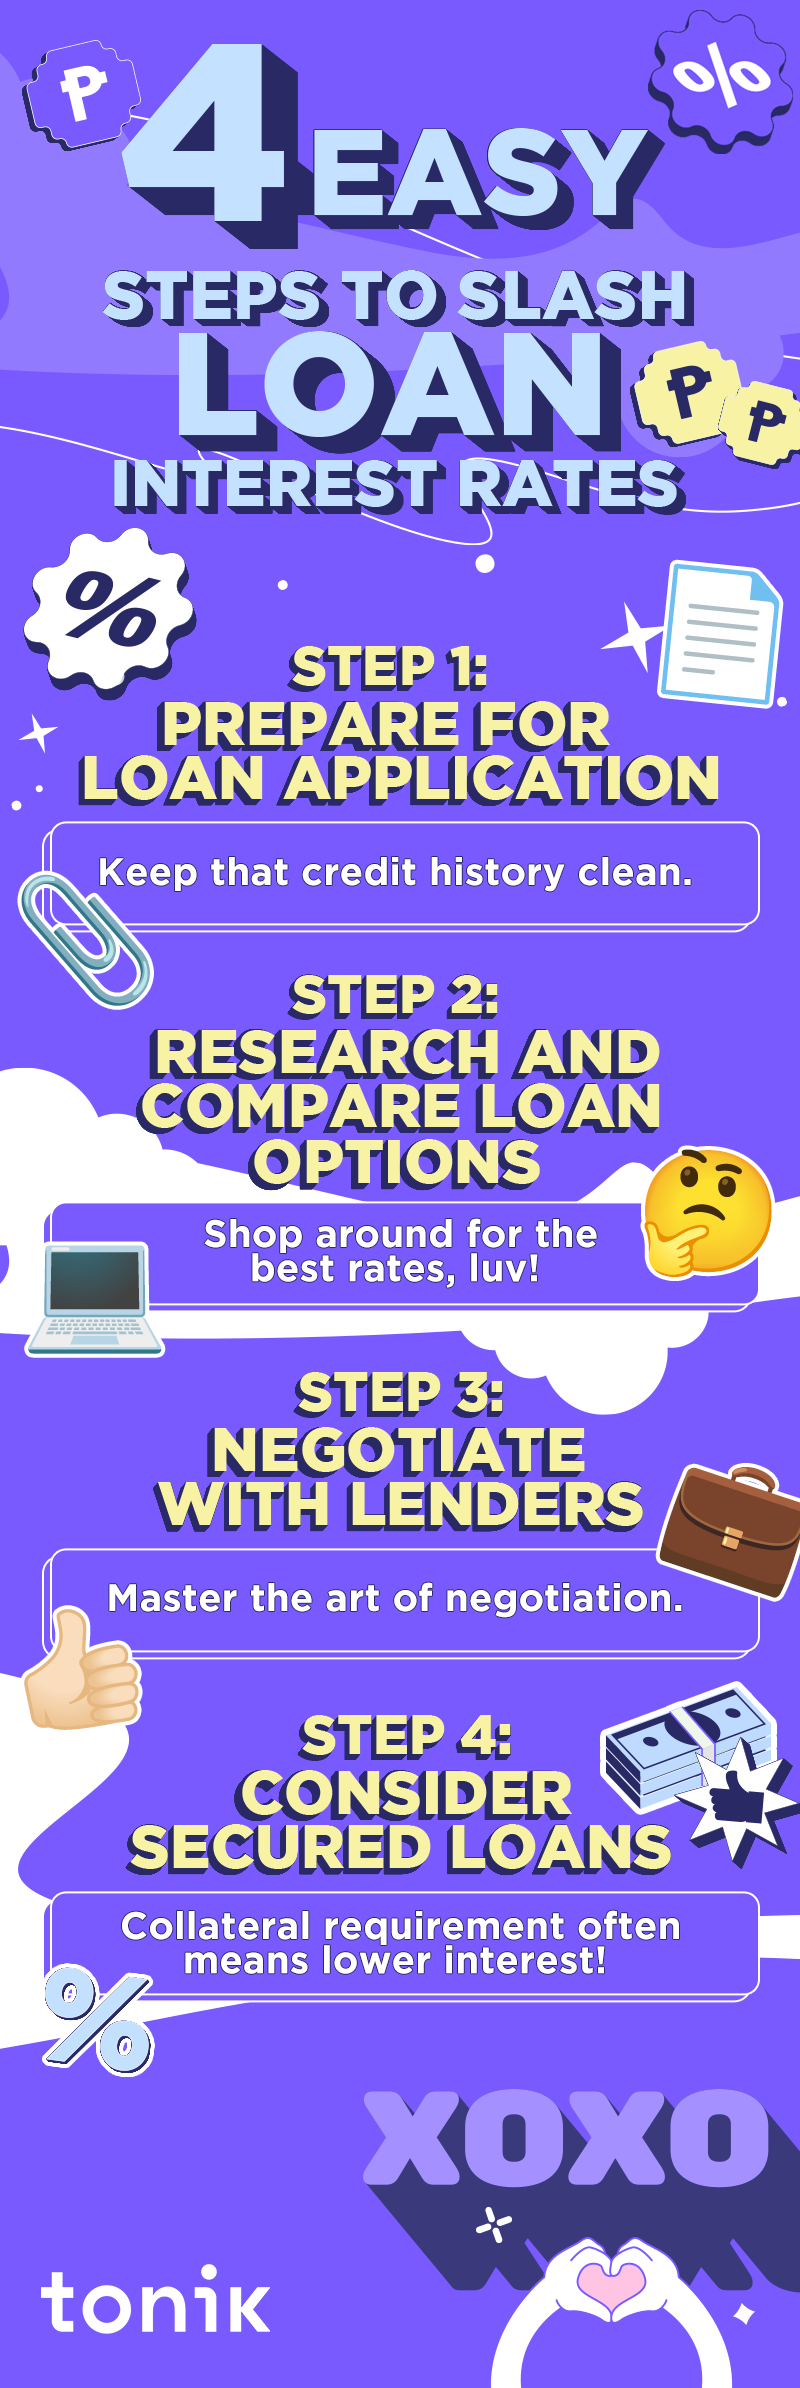 infographic with ways to get lower loan interest rates